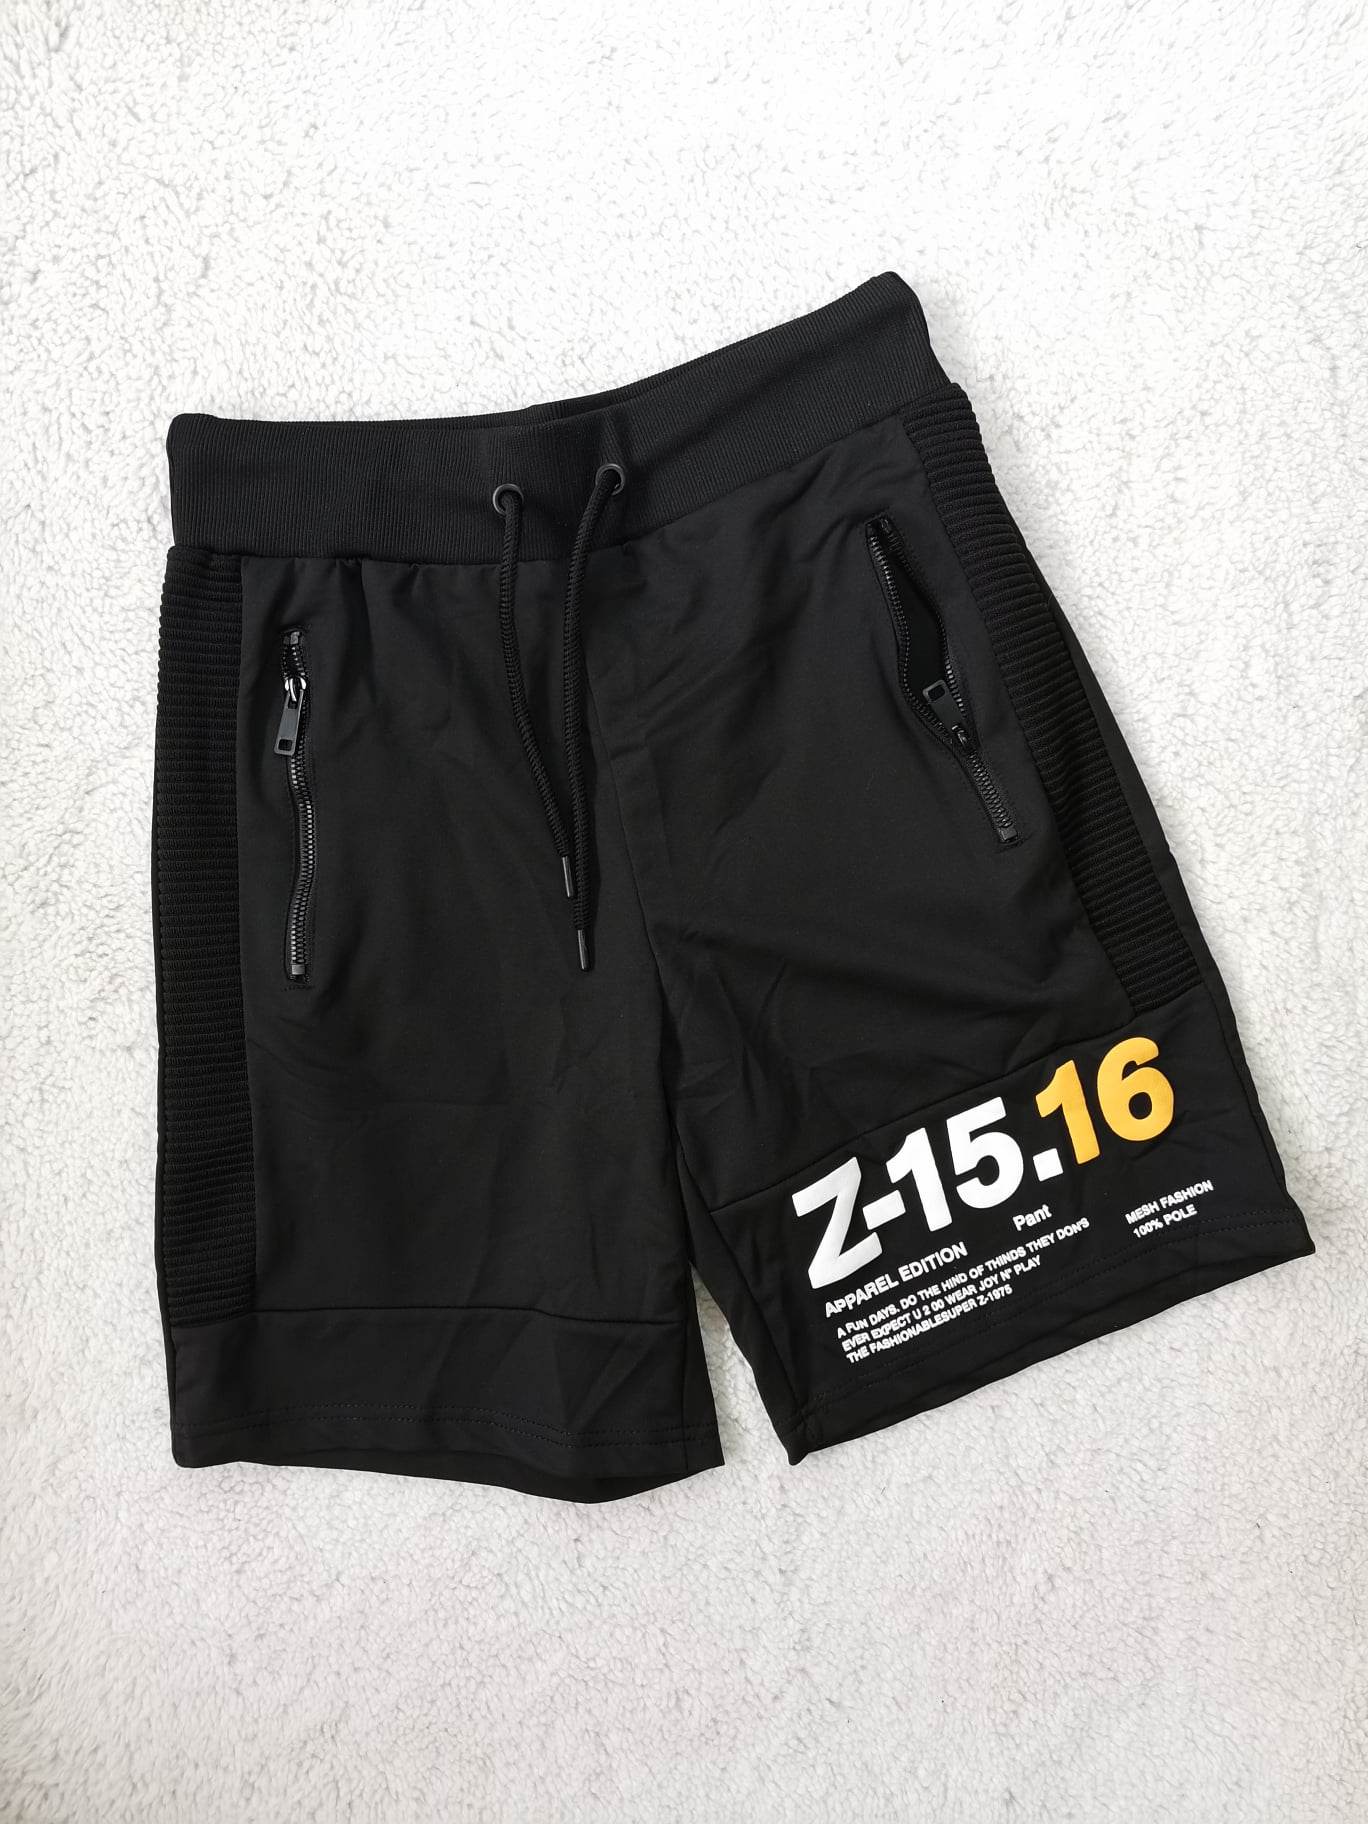 SHORT FLEX STYLE 23/23 TWO TONE WITH PRINT Z-15.6 MAN